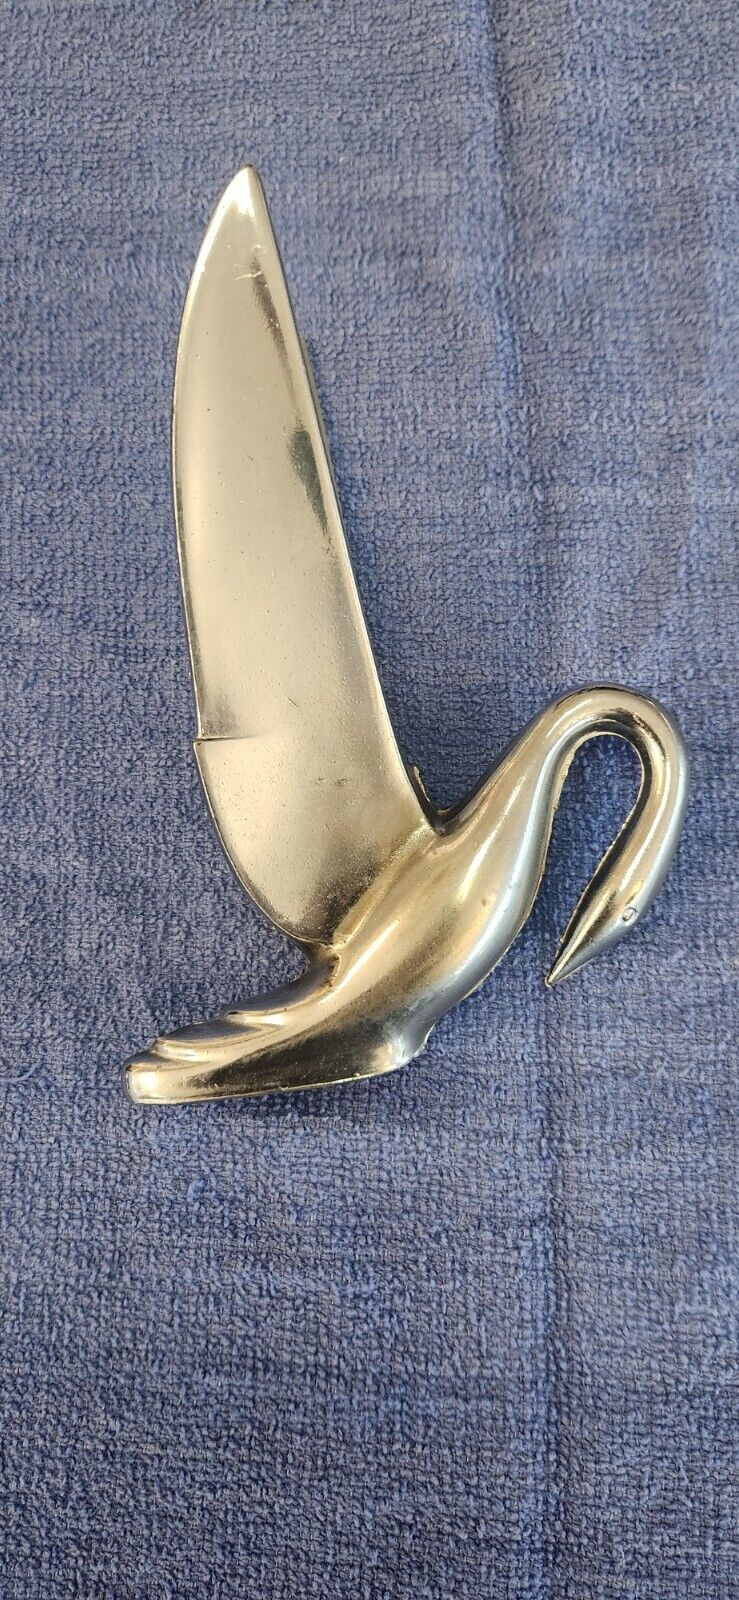 Packard Swan Hood Ornament 1940's 1950's Nice Condition